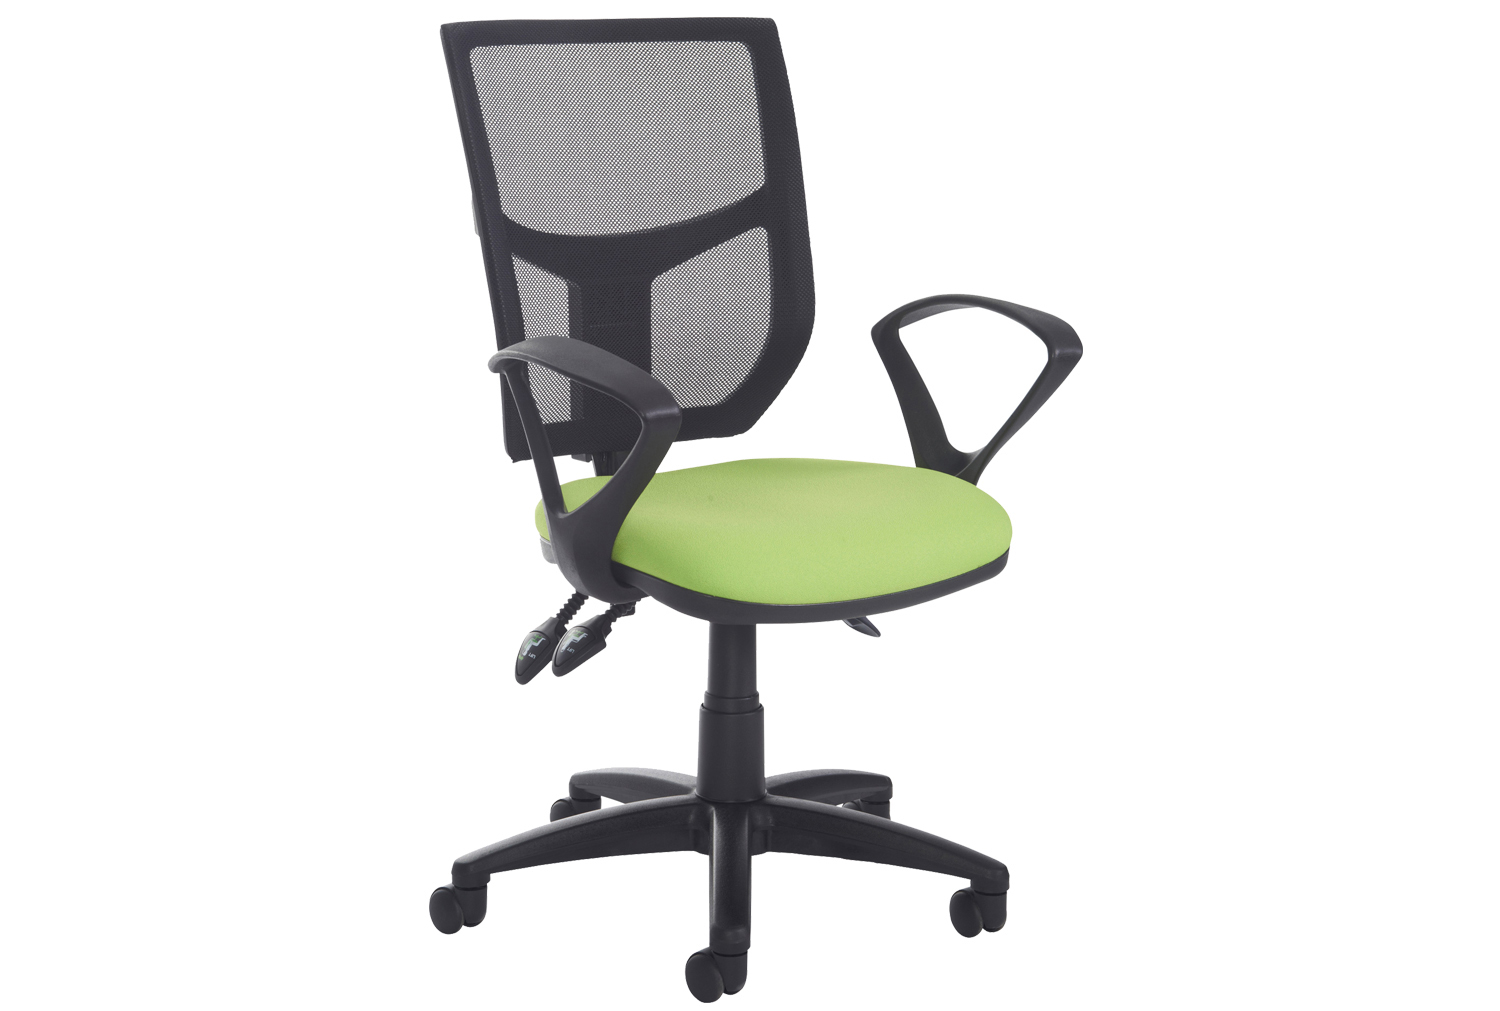 Gordy 2 Lever Mesh Back Operator Office Chair With Fixed Arms, Havana